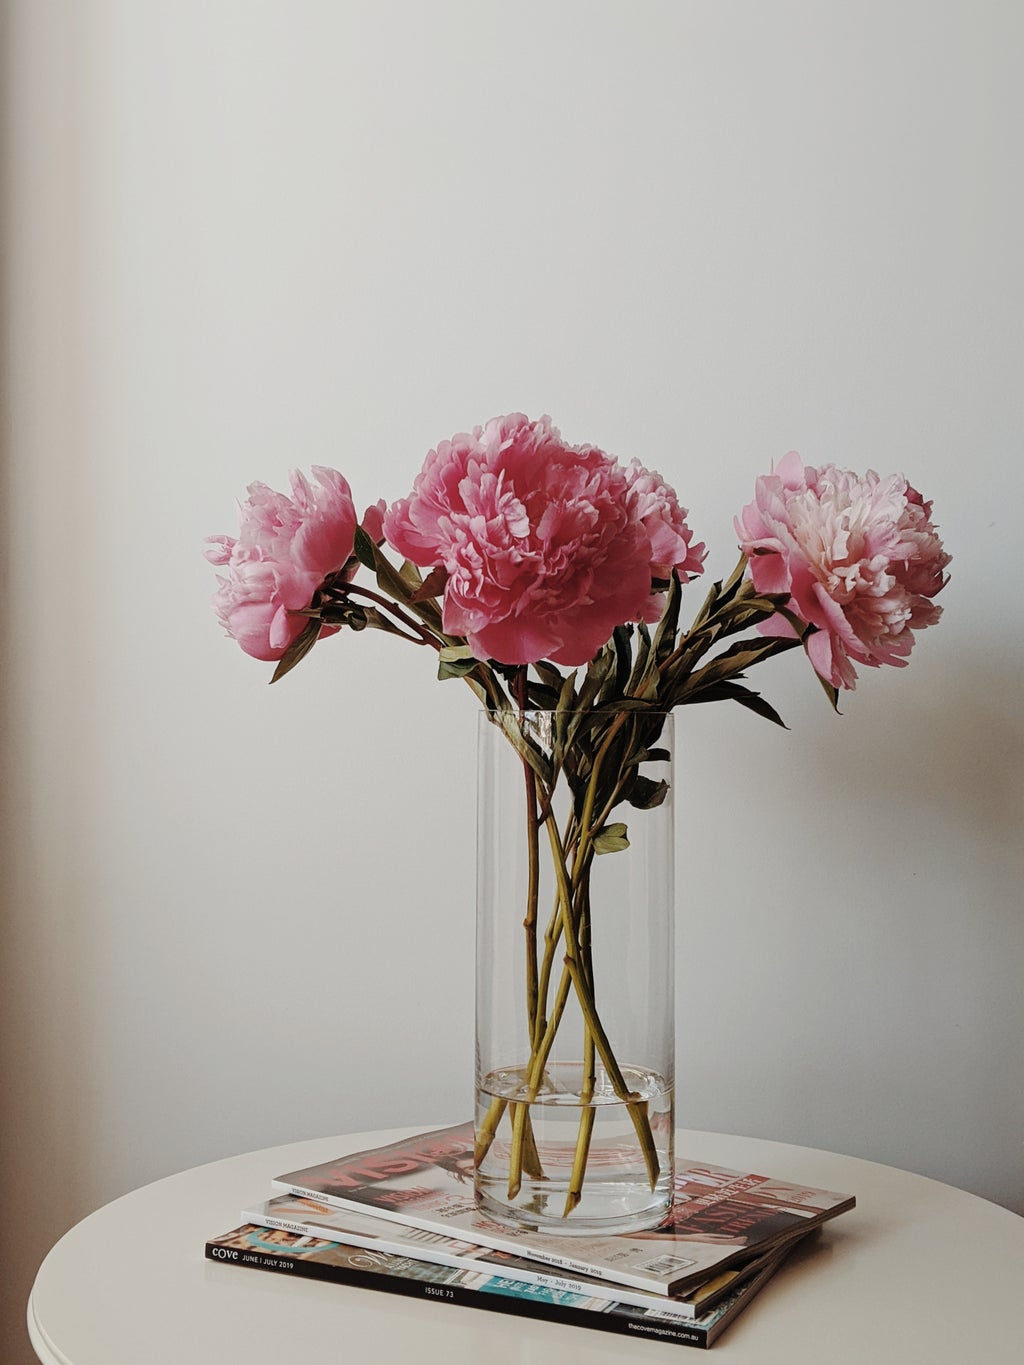 vase of flowers on a stack of magazines